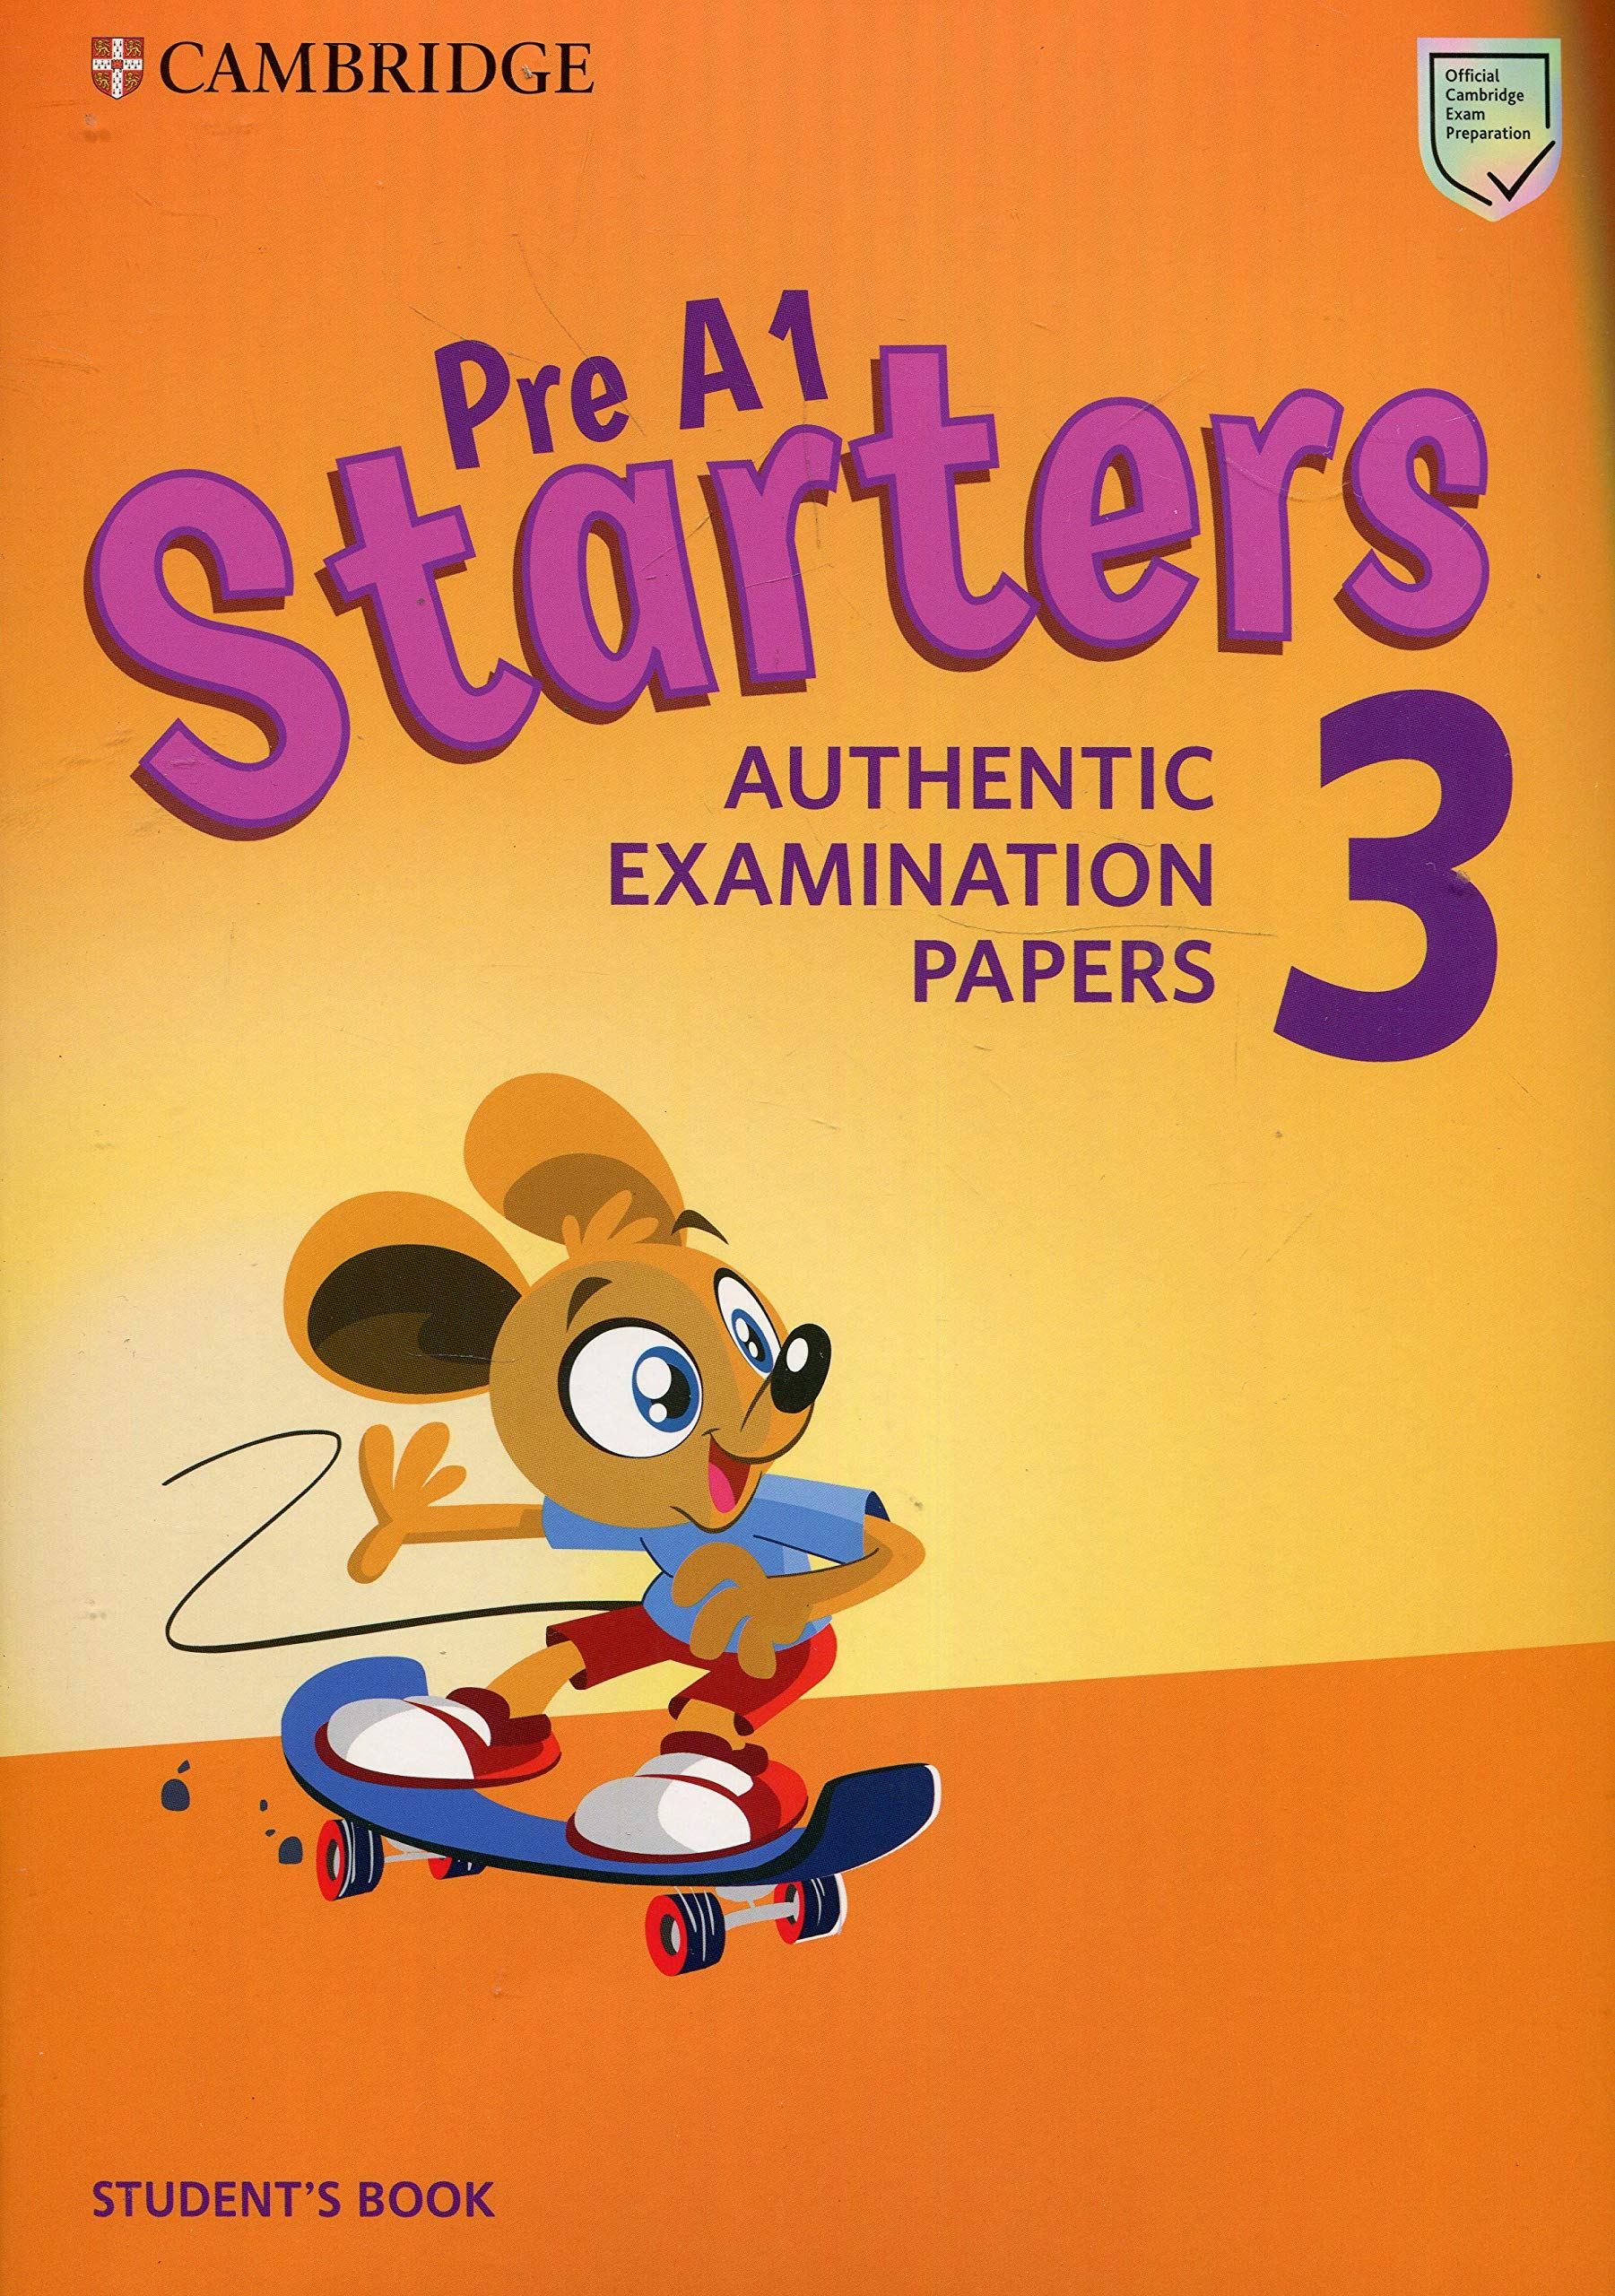 Pre a1 starters. Pre a1 Starters a1 Movers a2 Flyers. Starters 3 authentic examination papers. Starters authentic examination papers 1. Книга Cambridge Starters.